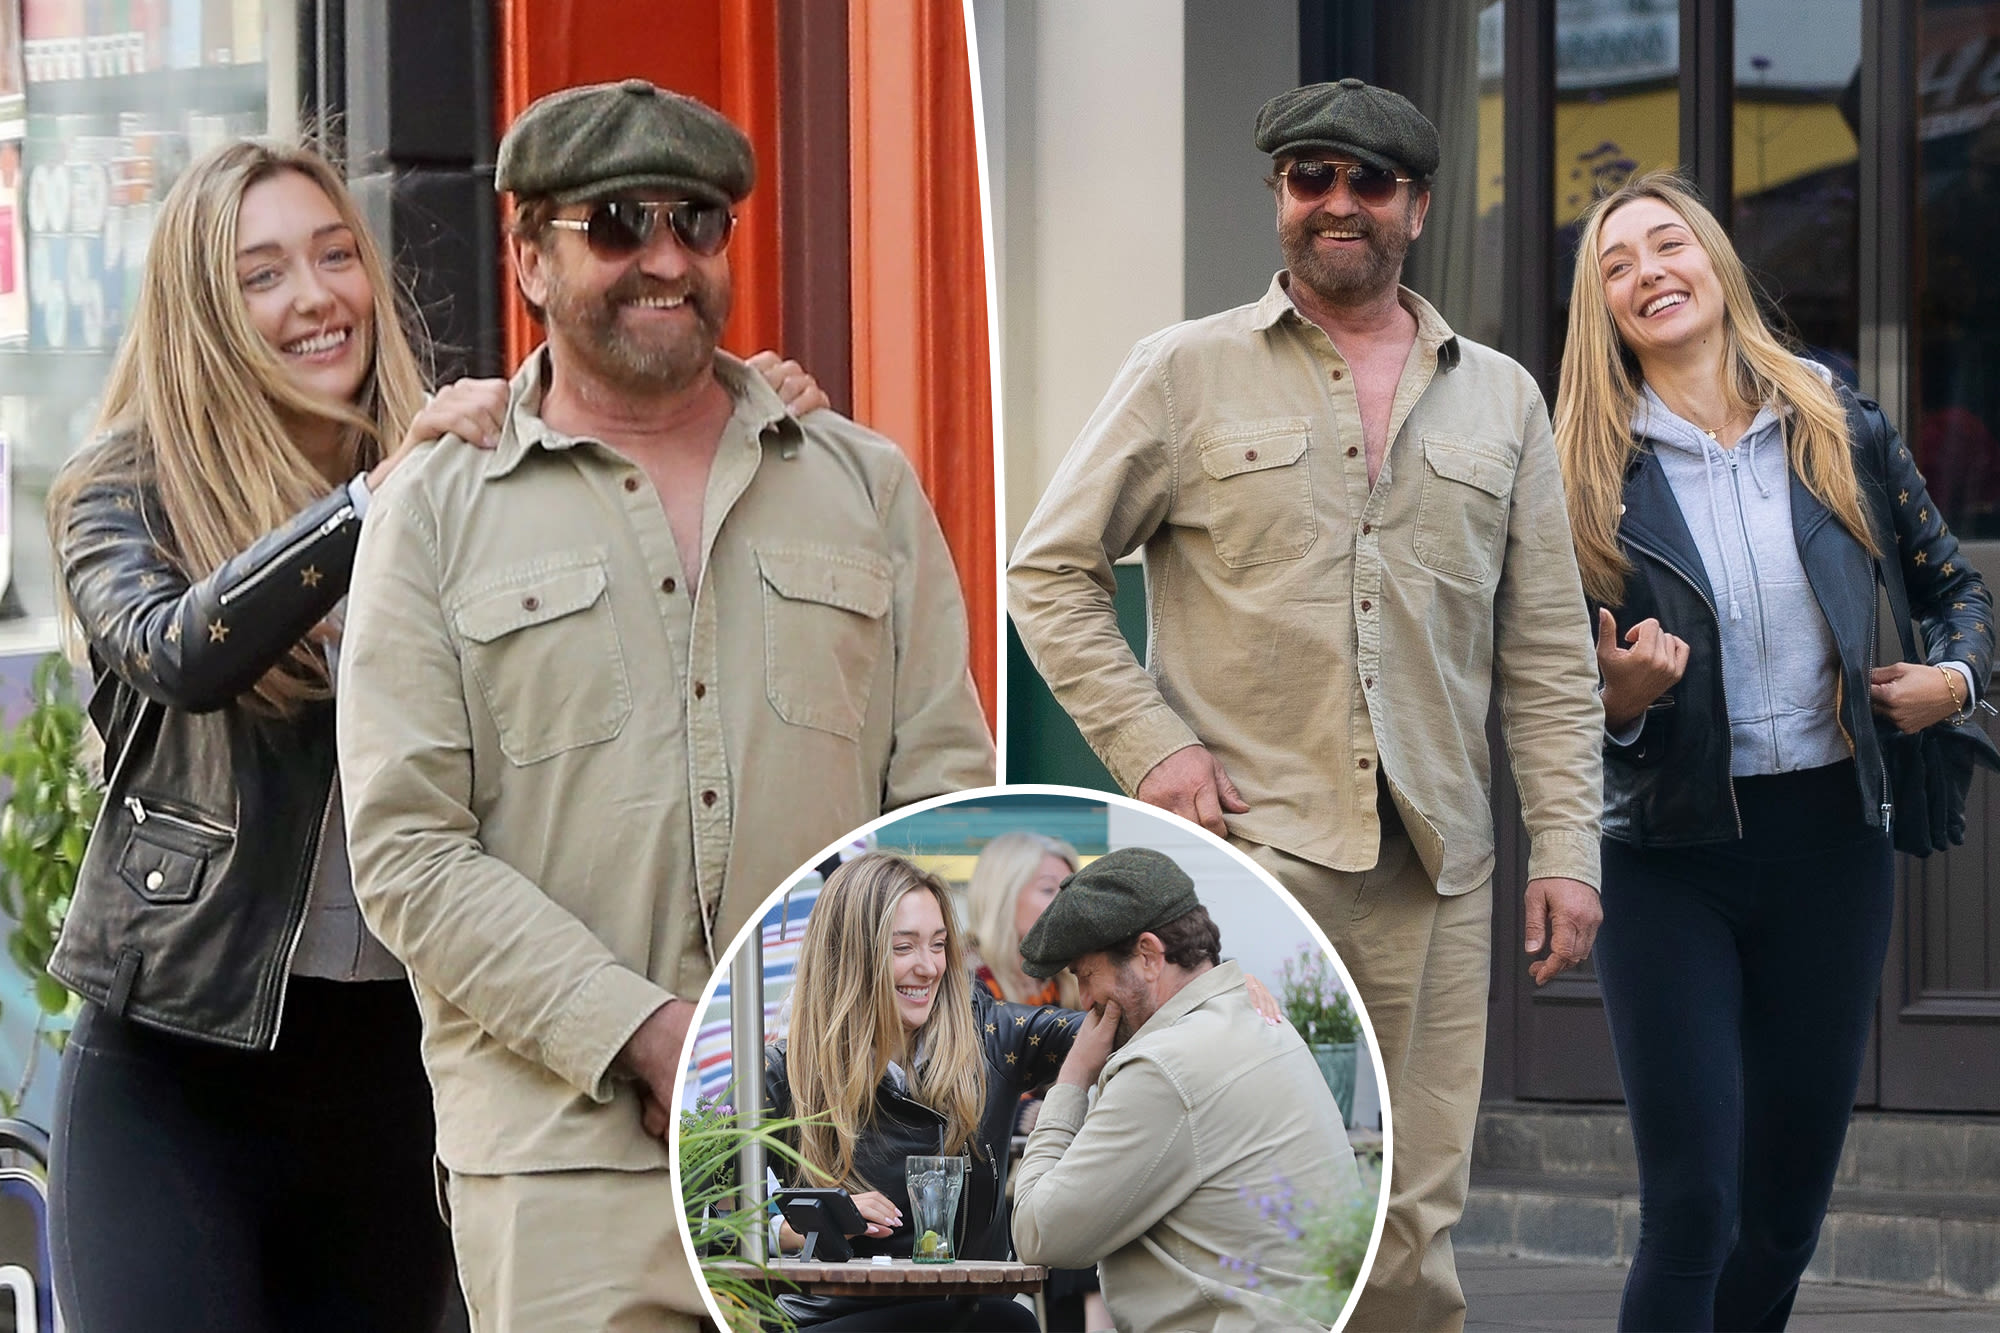 Gerard Butler, 54, all smiles as he cozies up to Sports Illustrated model, 29, during stroll in London